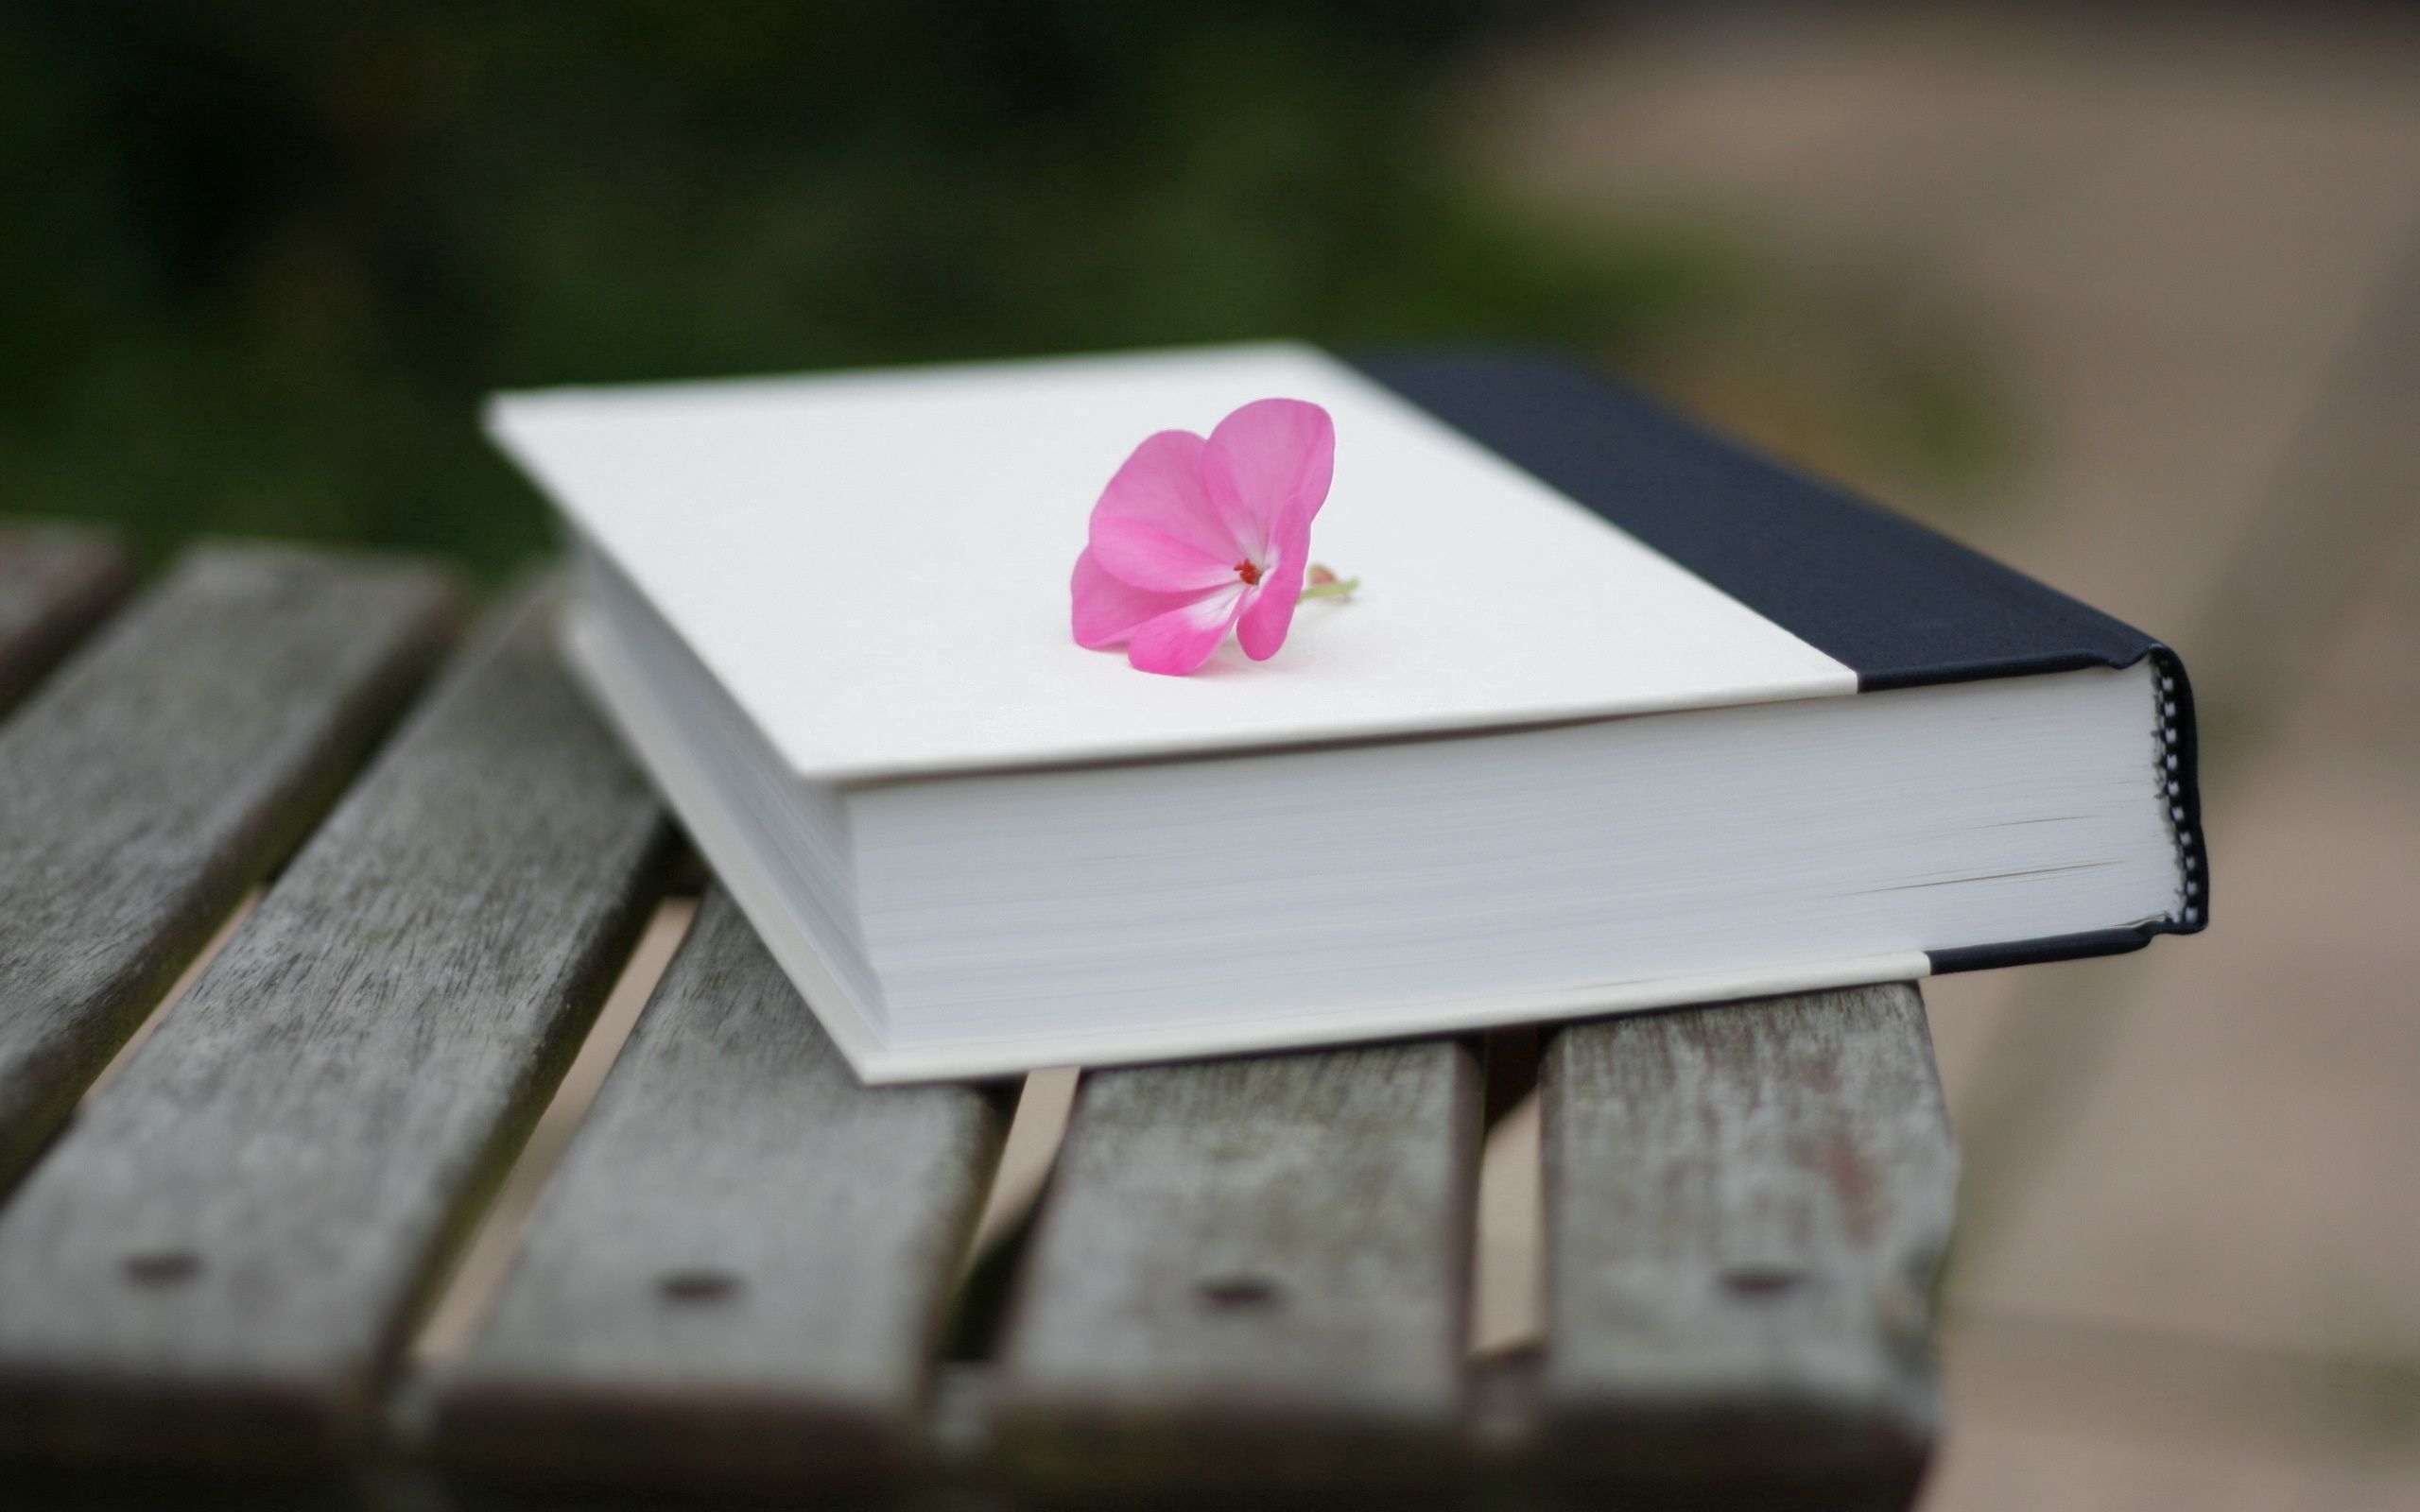 desktop Images smooth, flower, miscellanea, miscellaneous, blur, book, bench, handsomely, it's beautiful